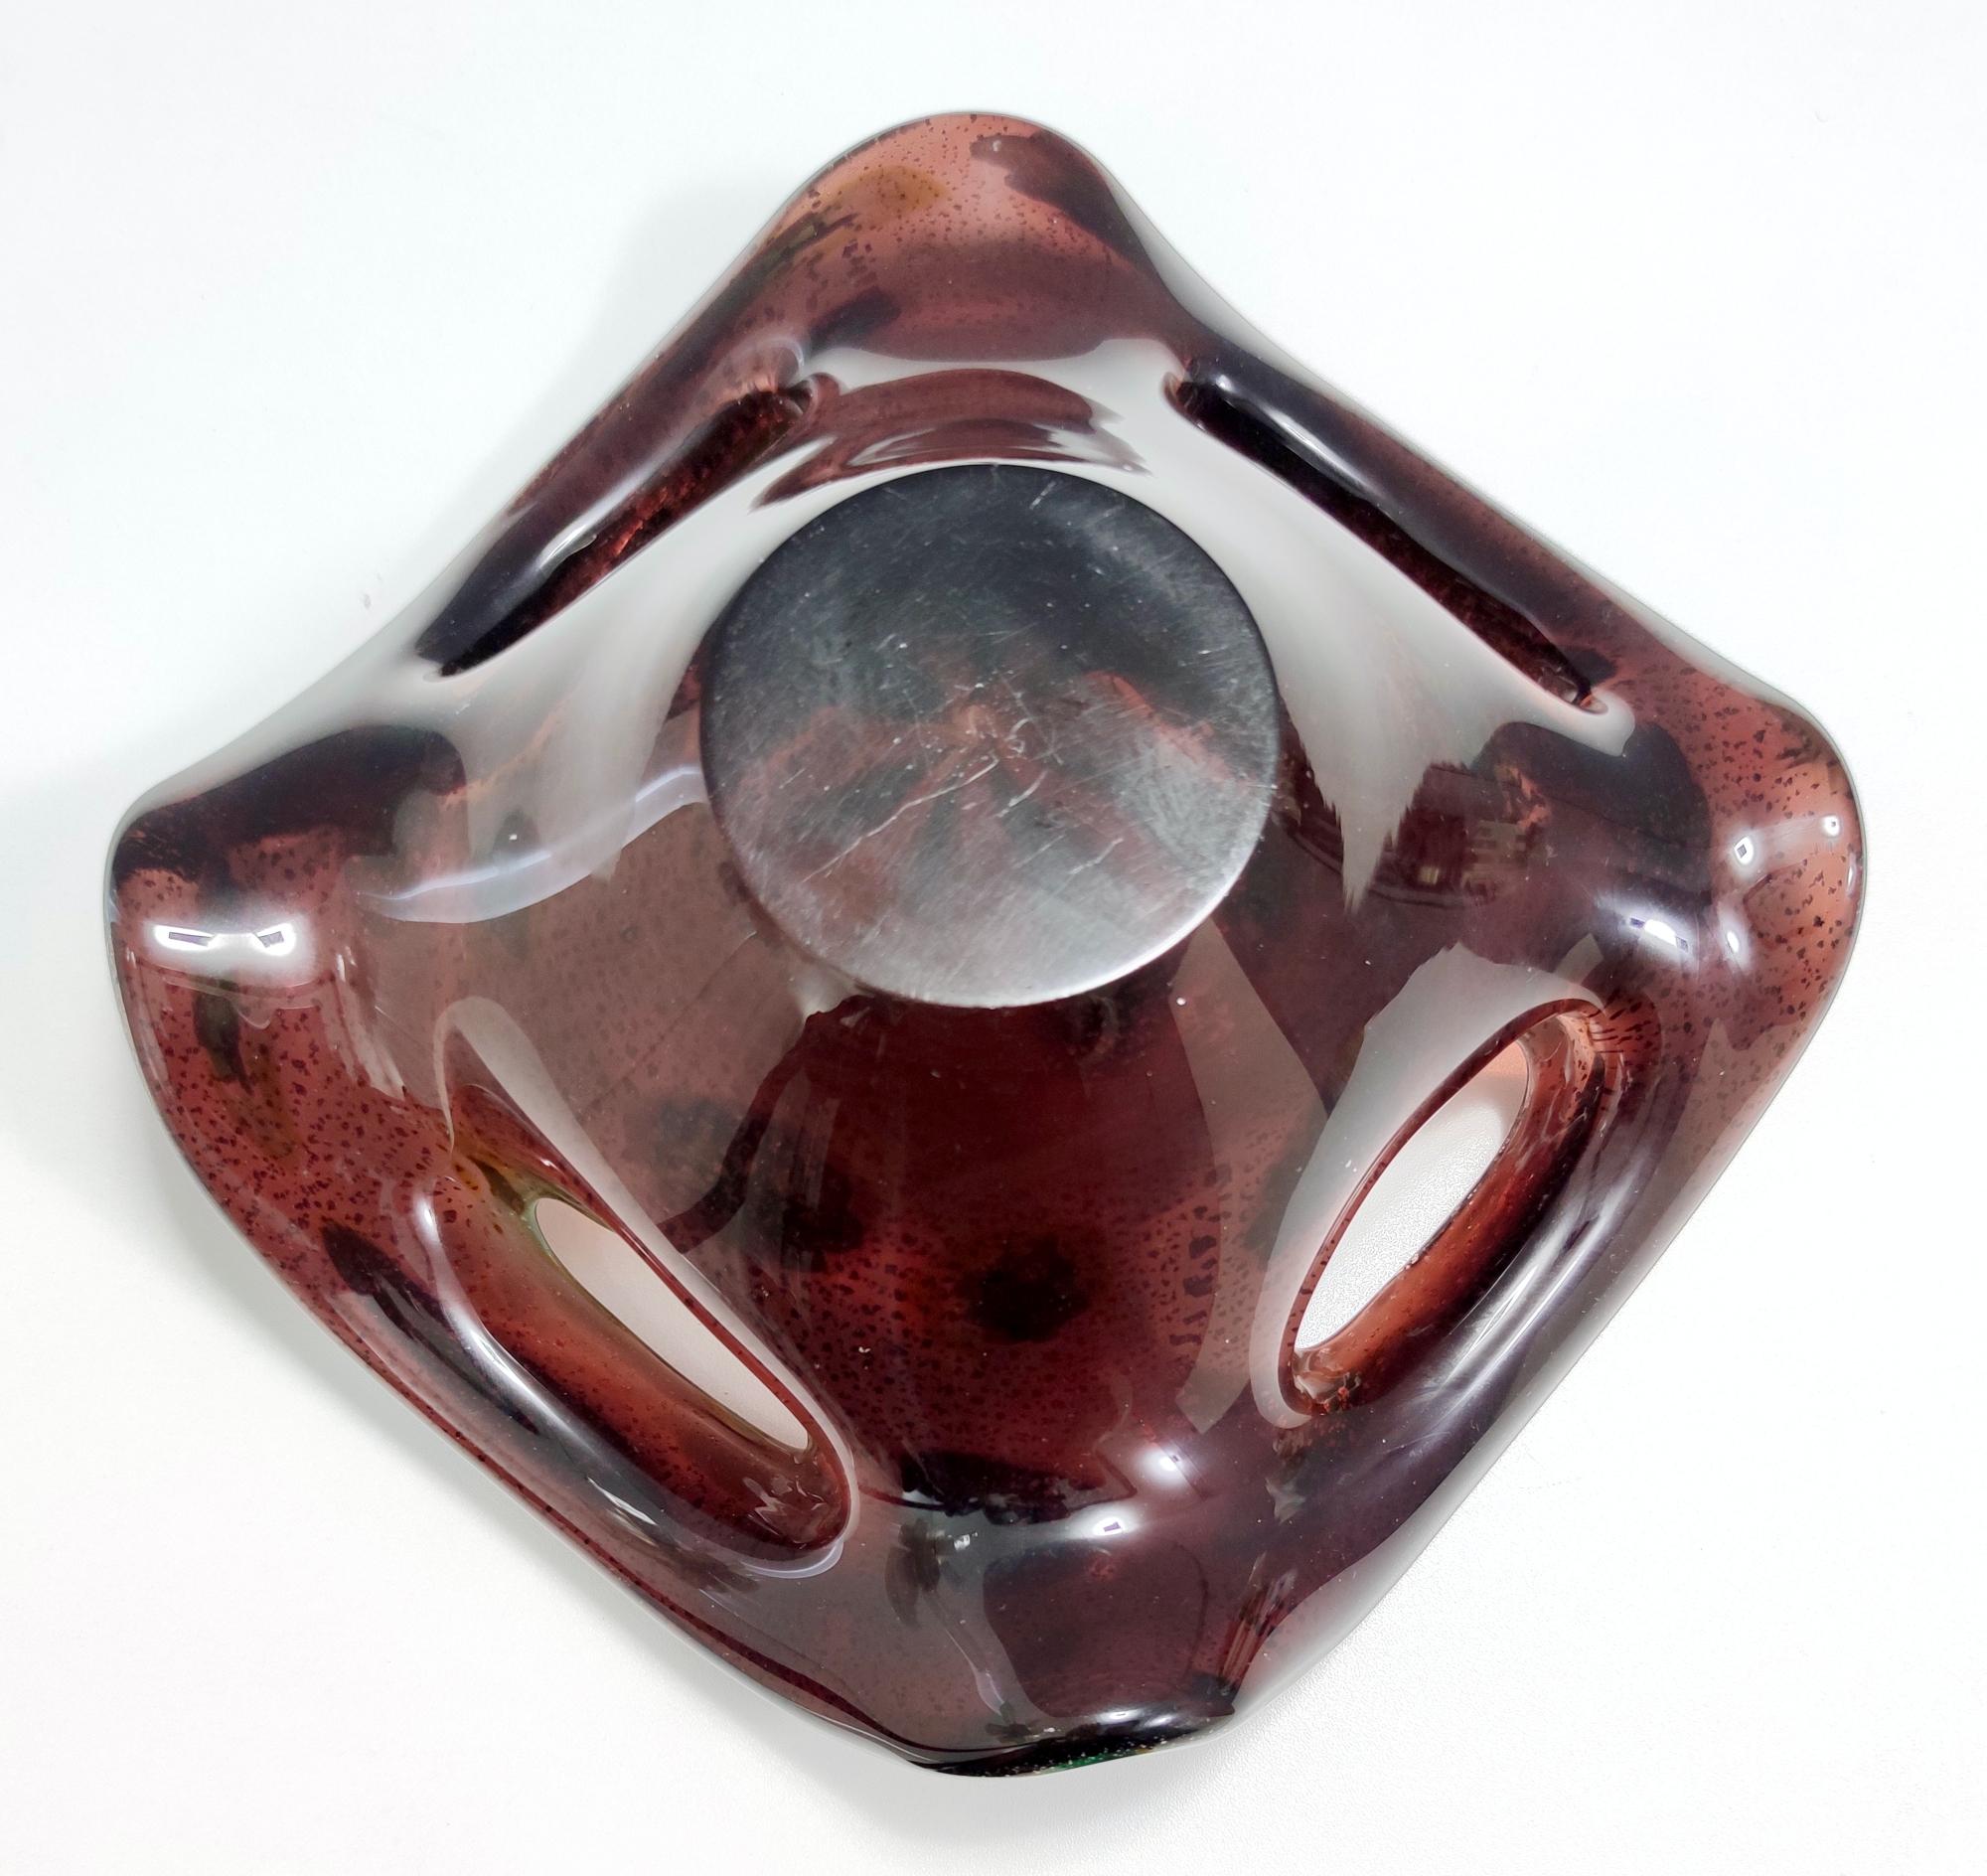 Milieu du XXe siècle Vintage Brown Murano Glass Ashtray / Catchall by Fratelli Toso with Murrines en vente